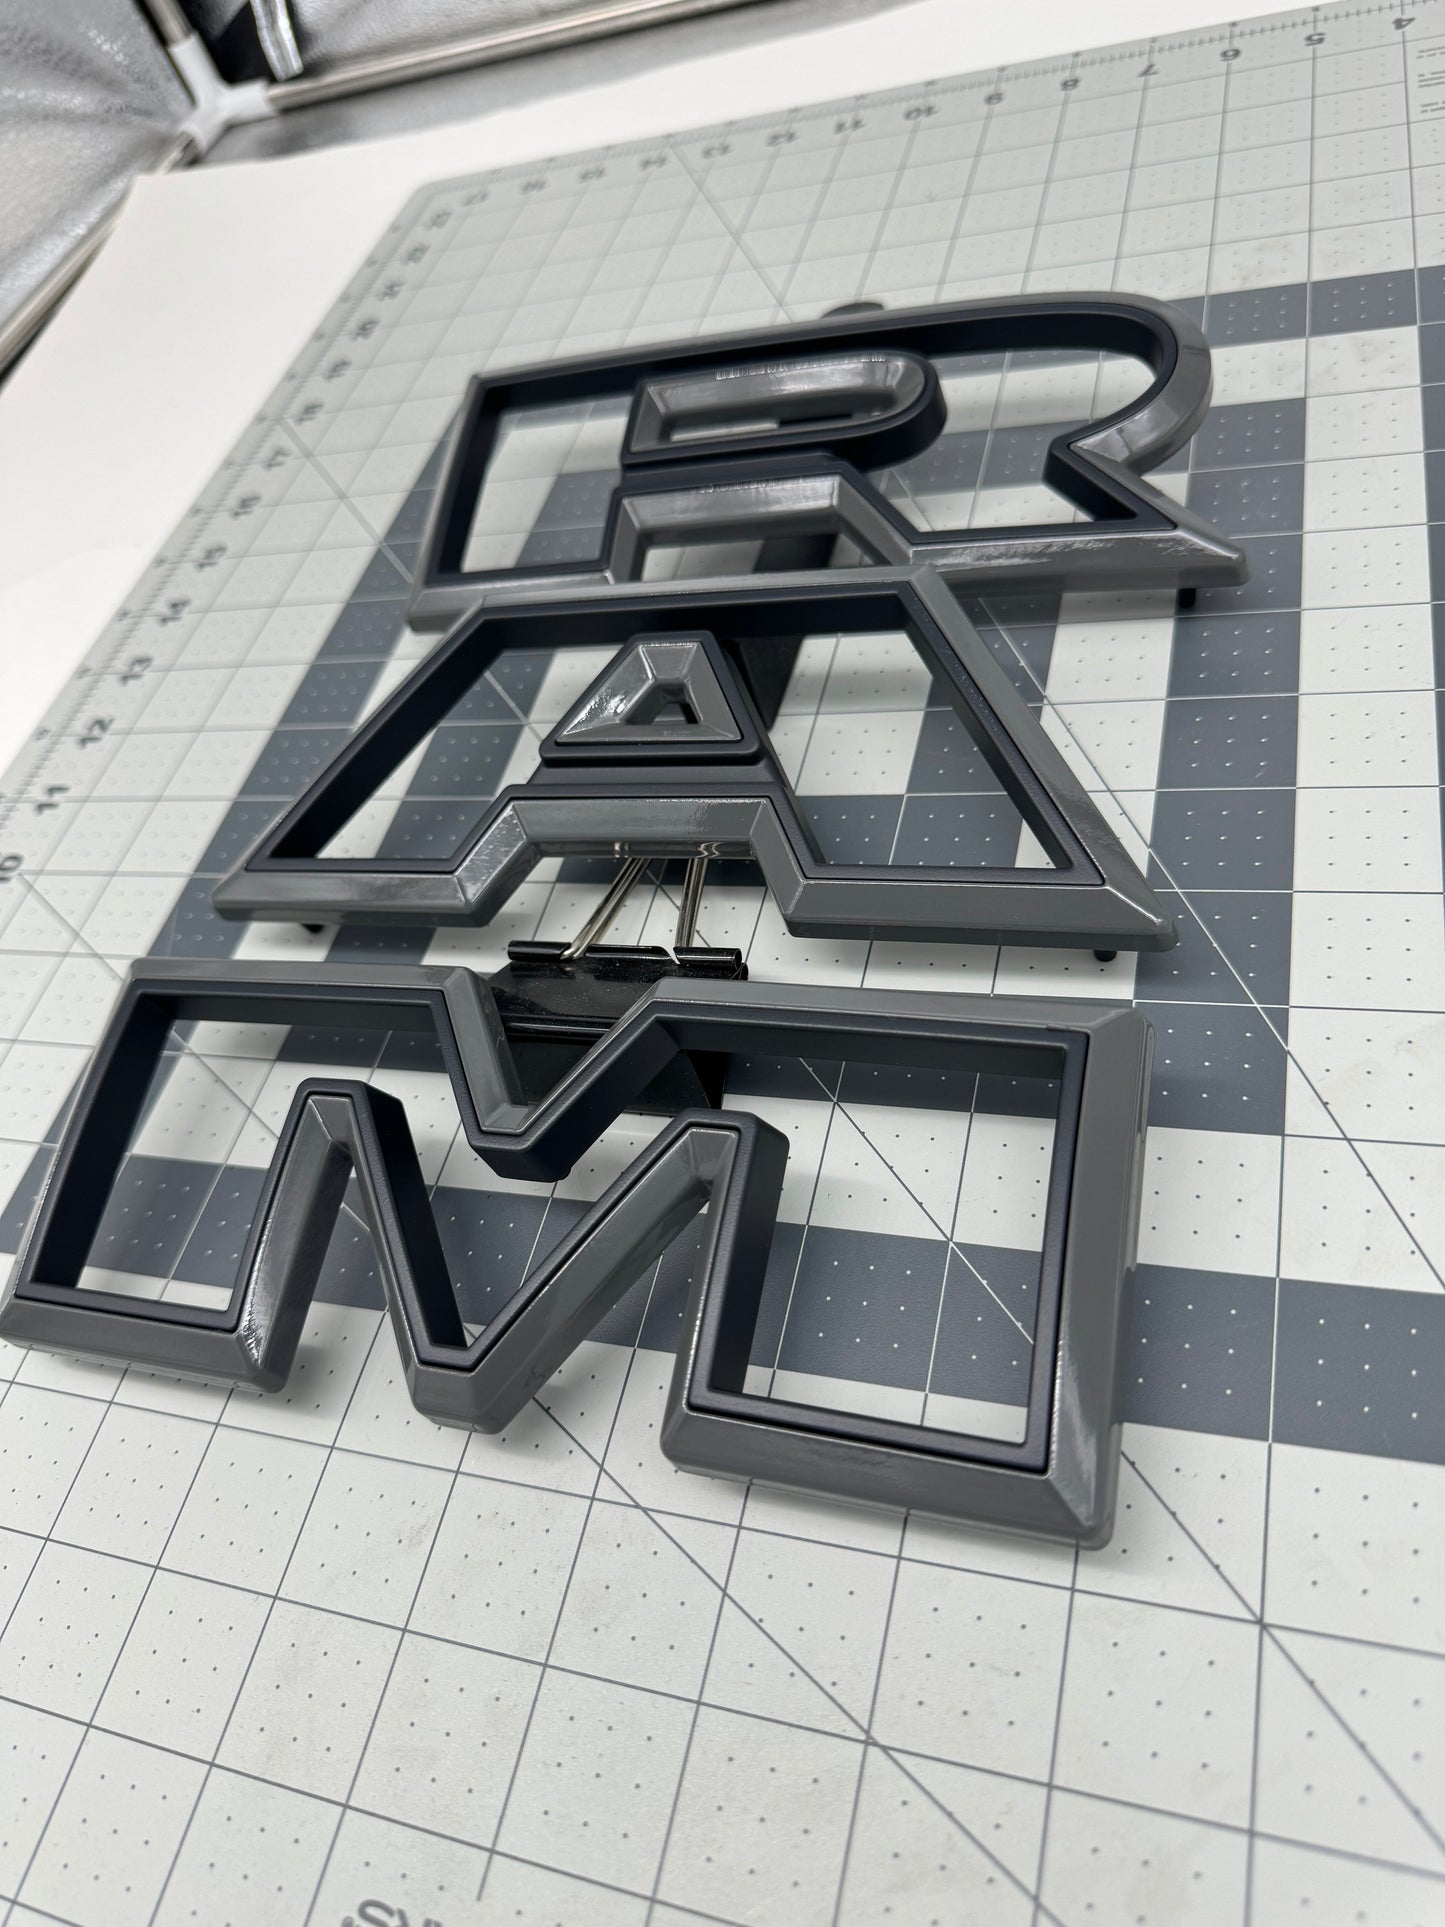 RAM Grille letter replacement badge set